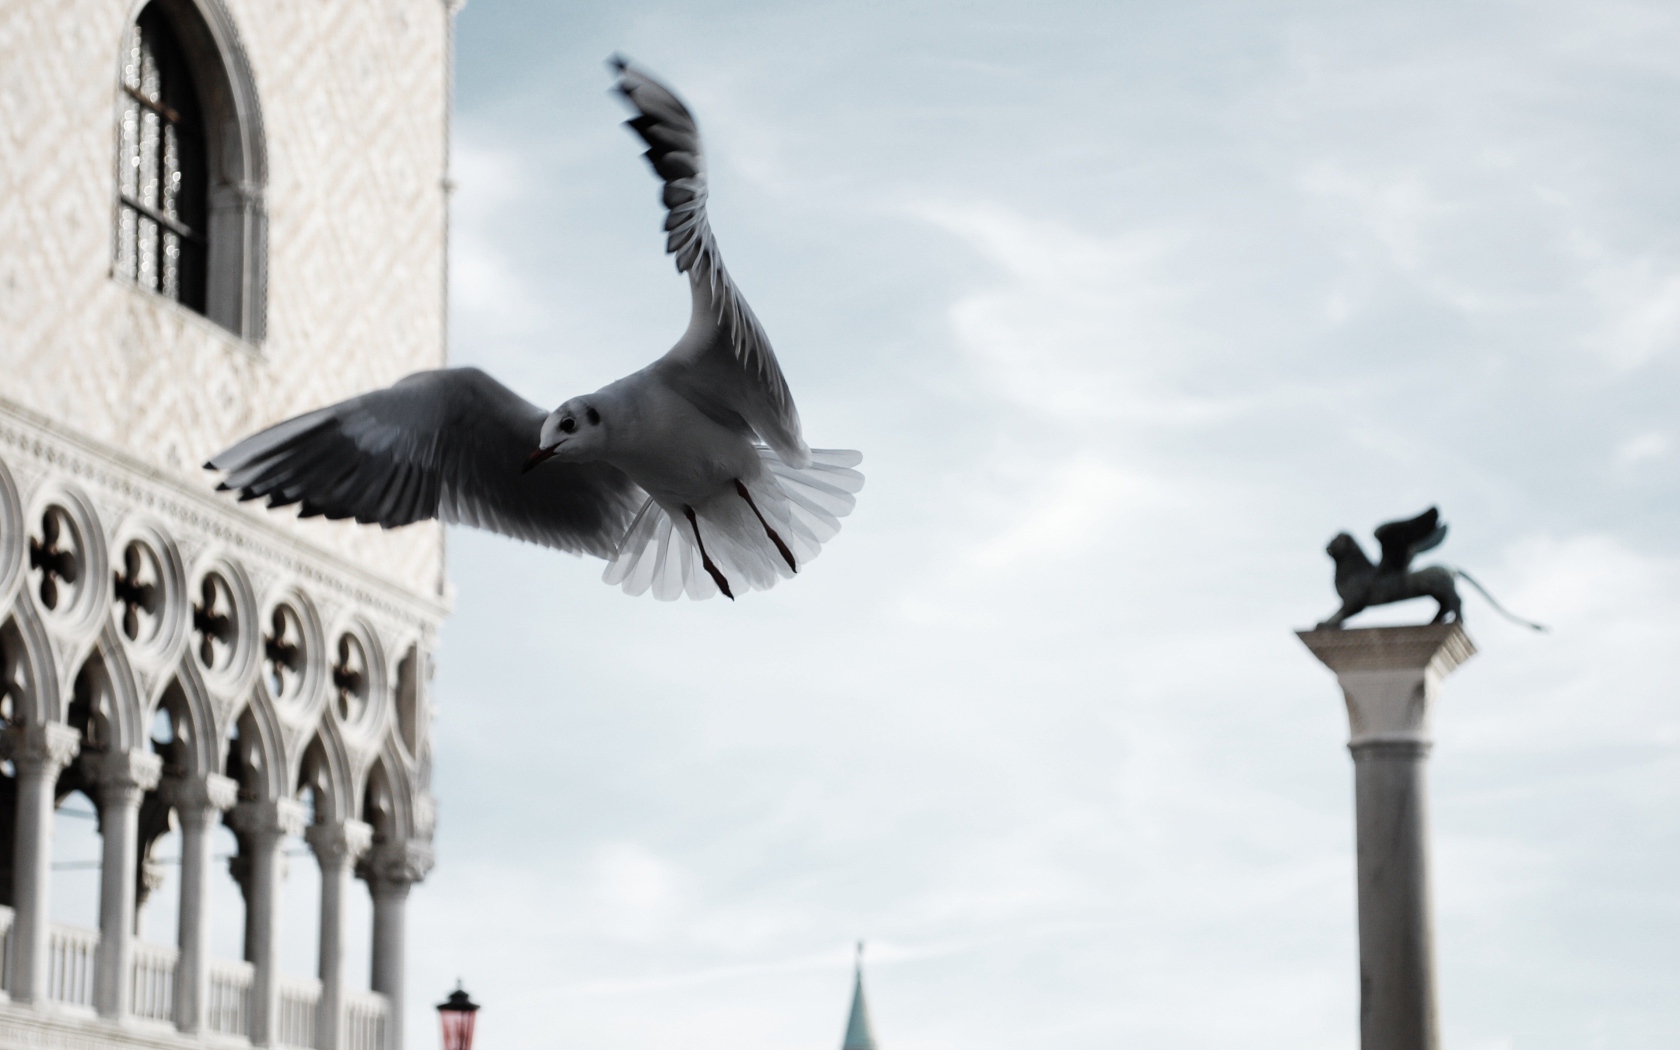 Seagull in flight by city